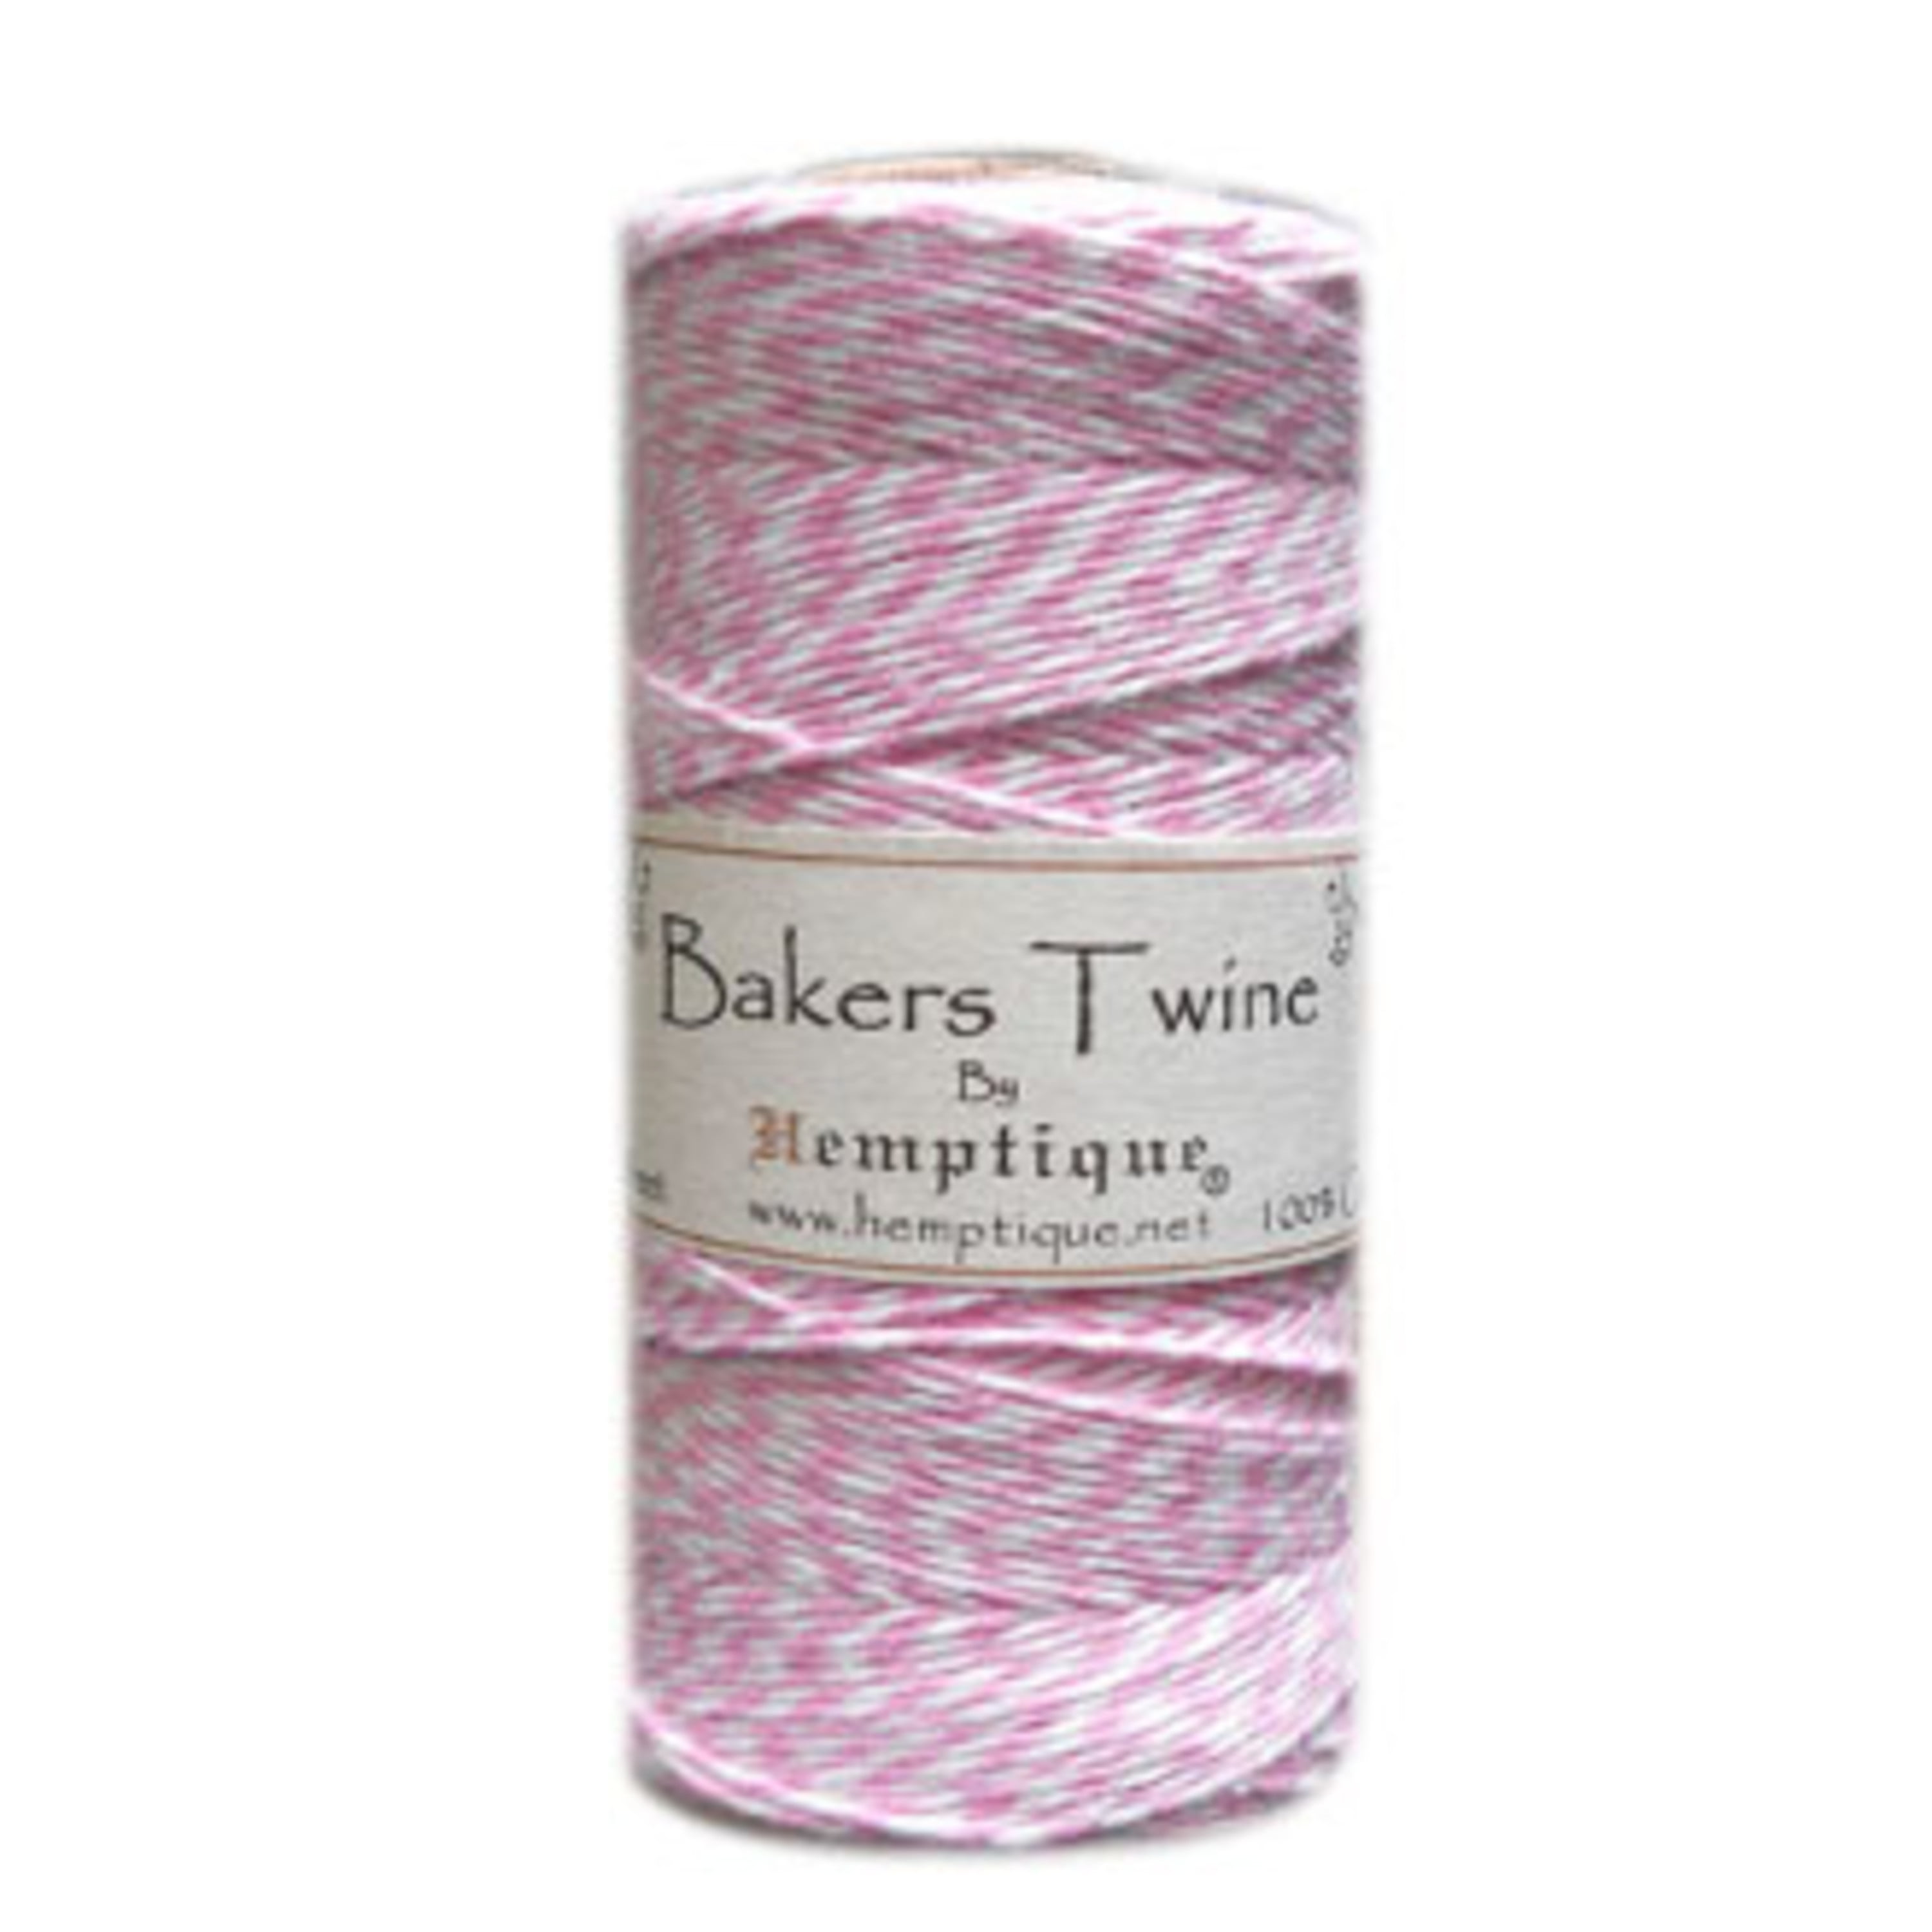 We R Memory Keepers Happy Jig Pink Baker's Twine Wire